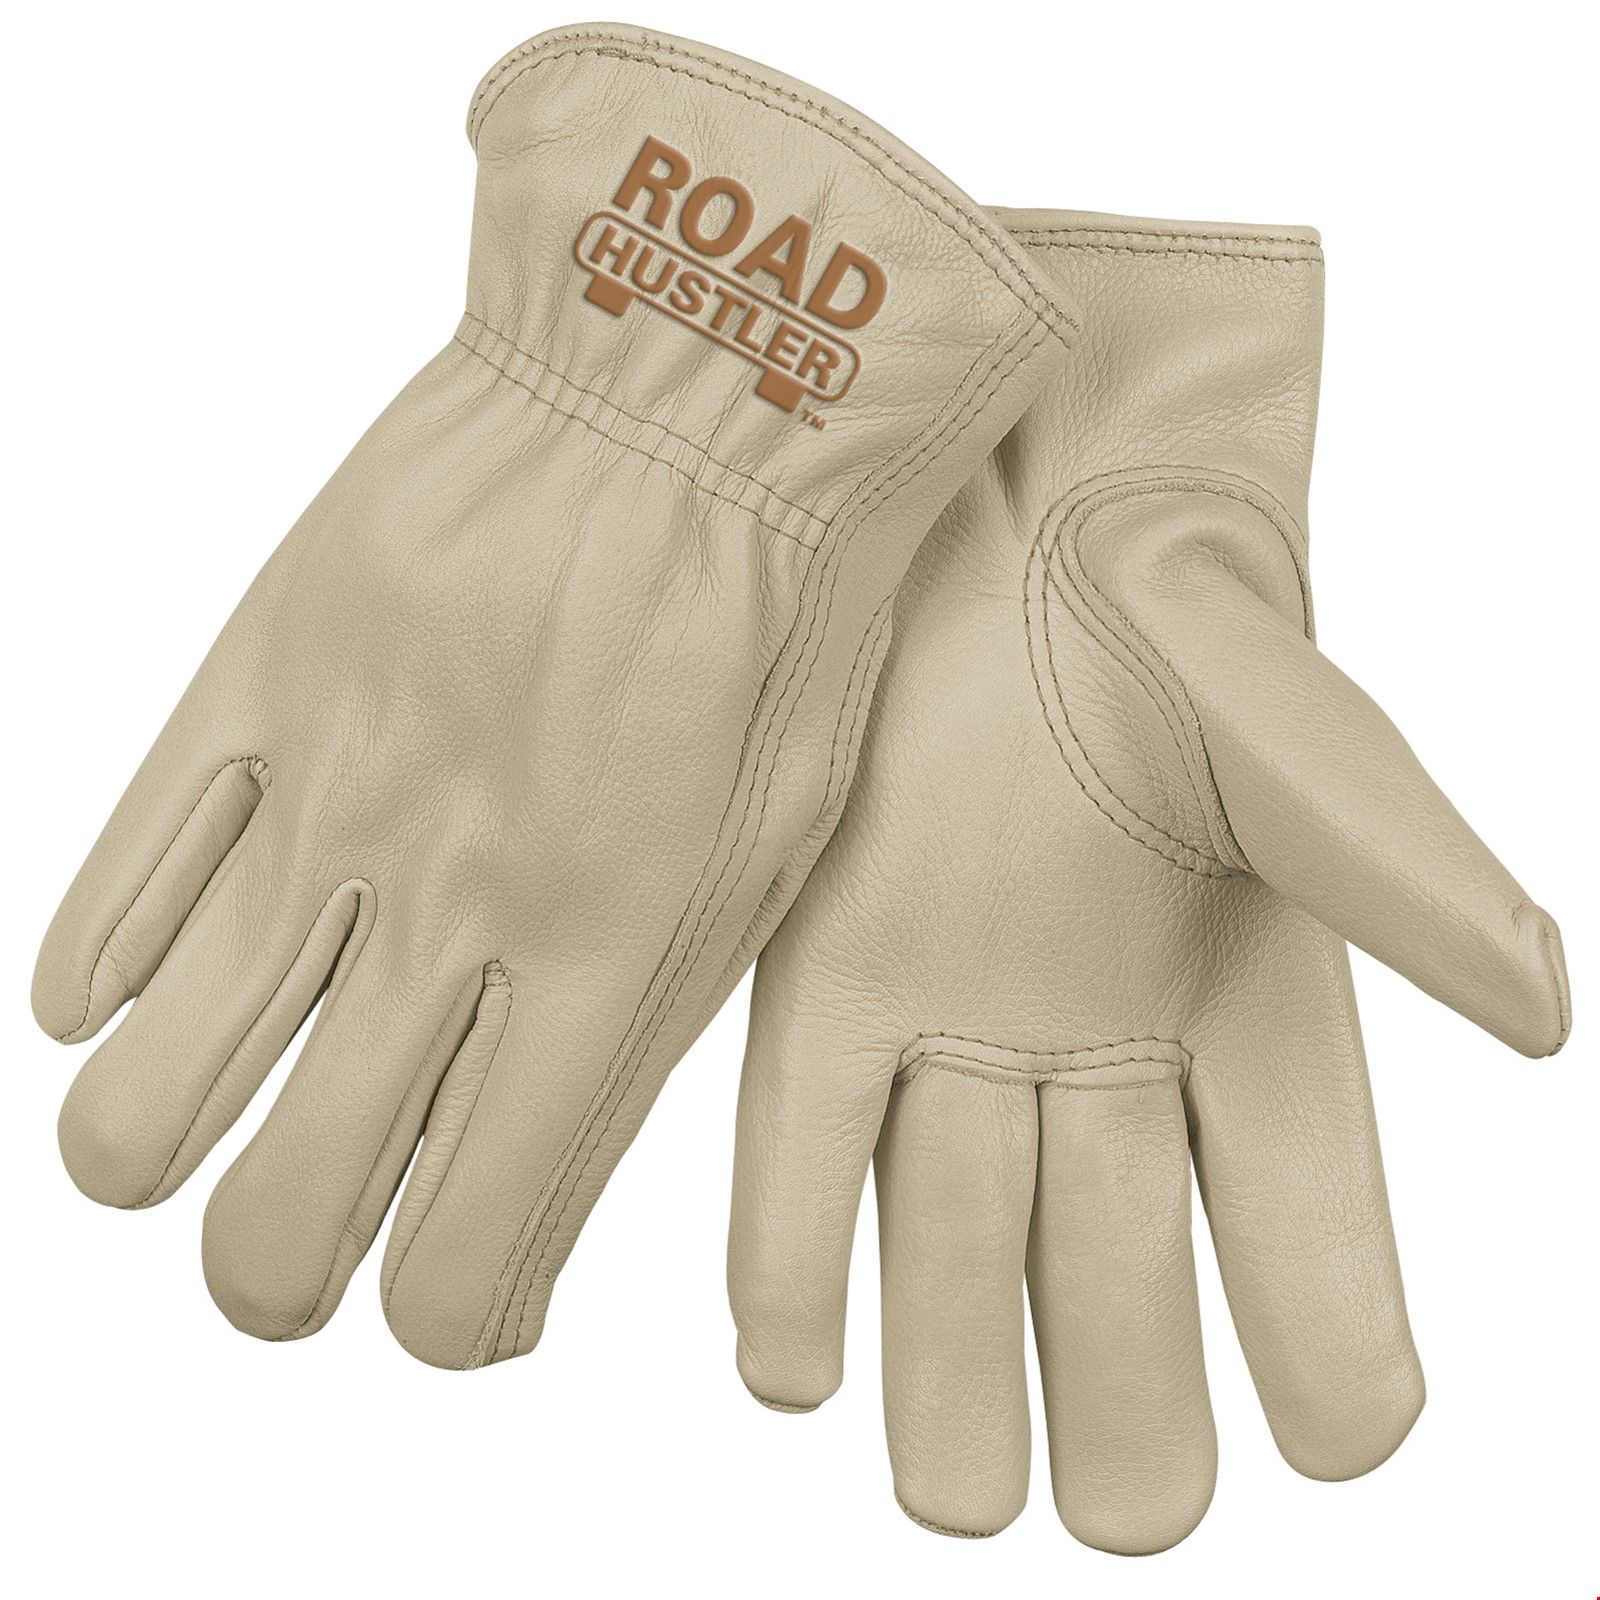 Dahlia recommend best of Road hustler leather gloves